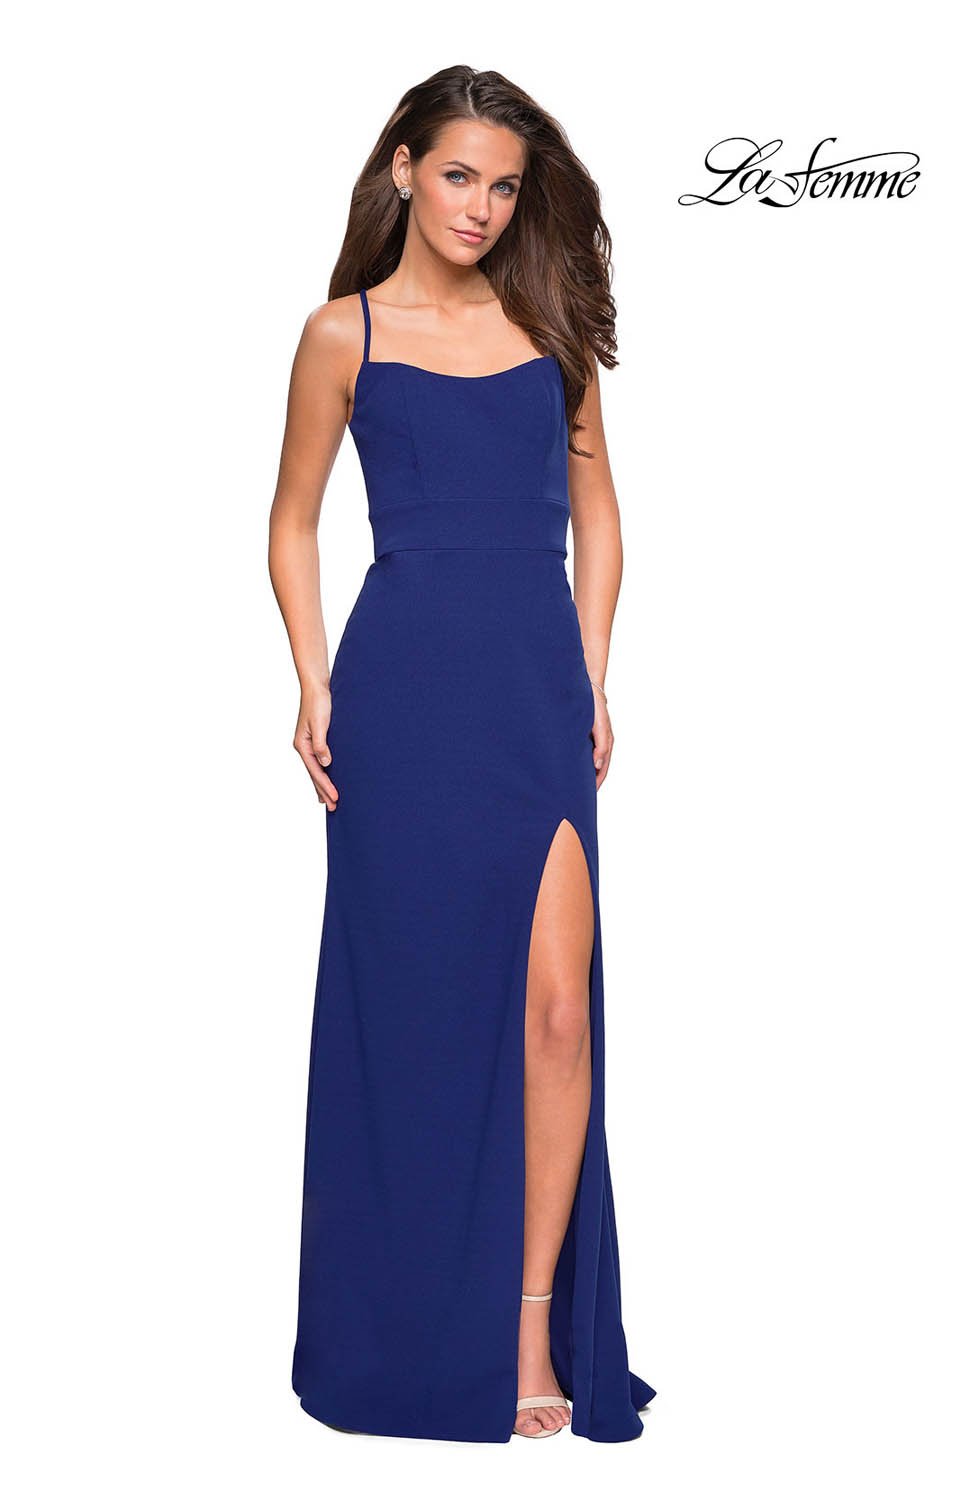 La Femme 26940 dress images in these colors: Black, Burgundy, Sapphire Blue, White.